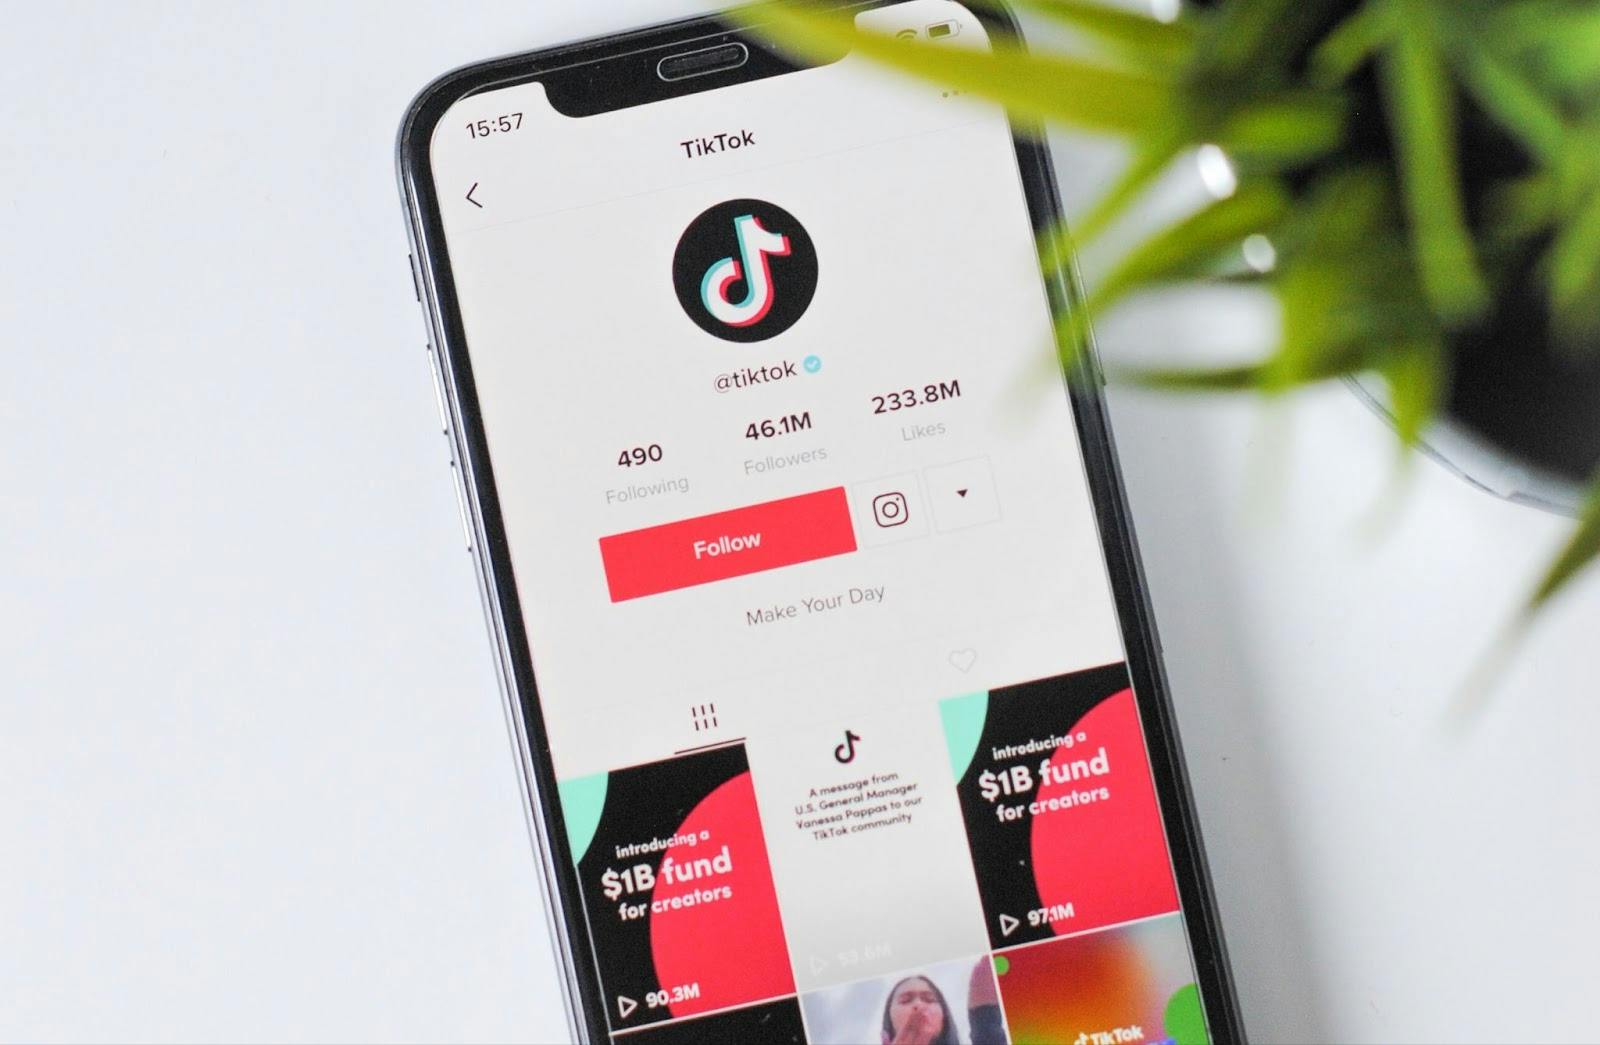 Image of the Tiktok app on a mobile screen